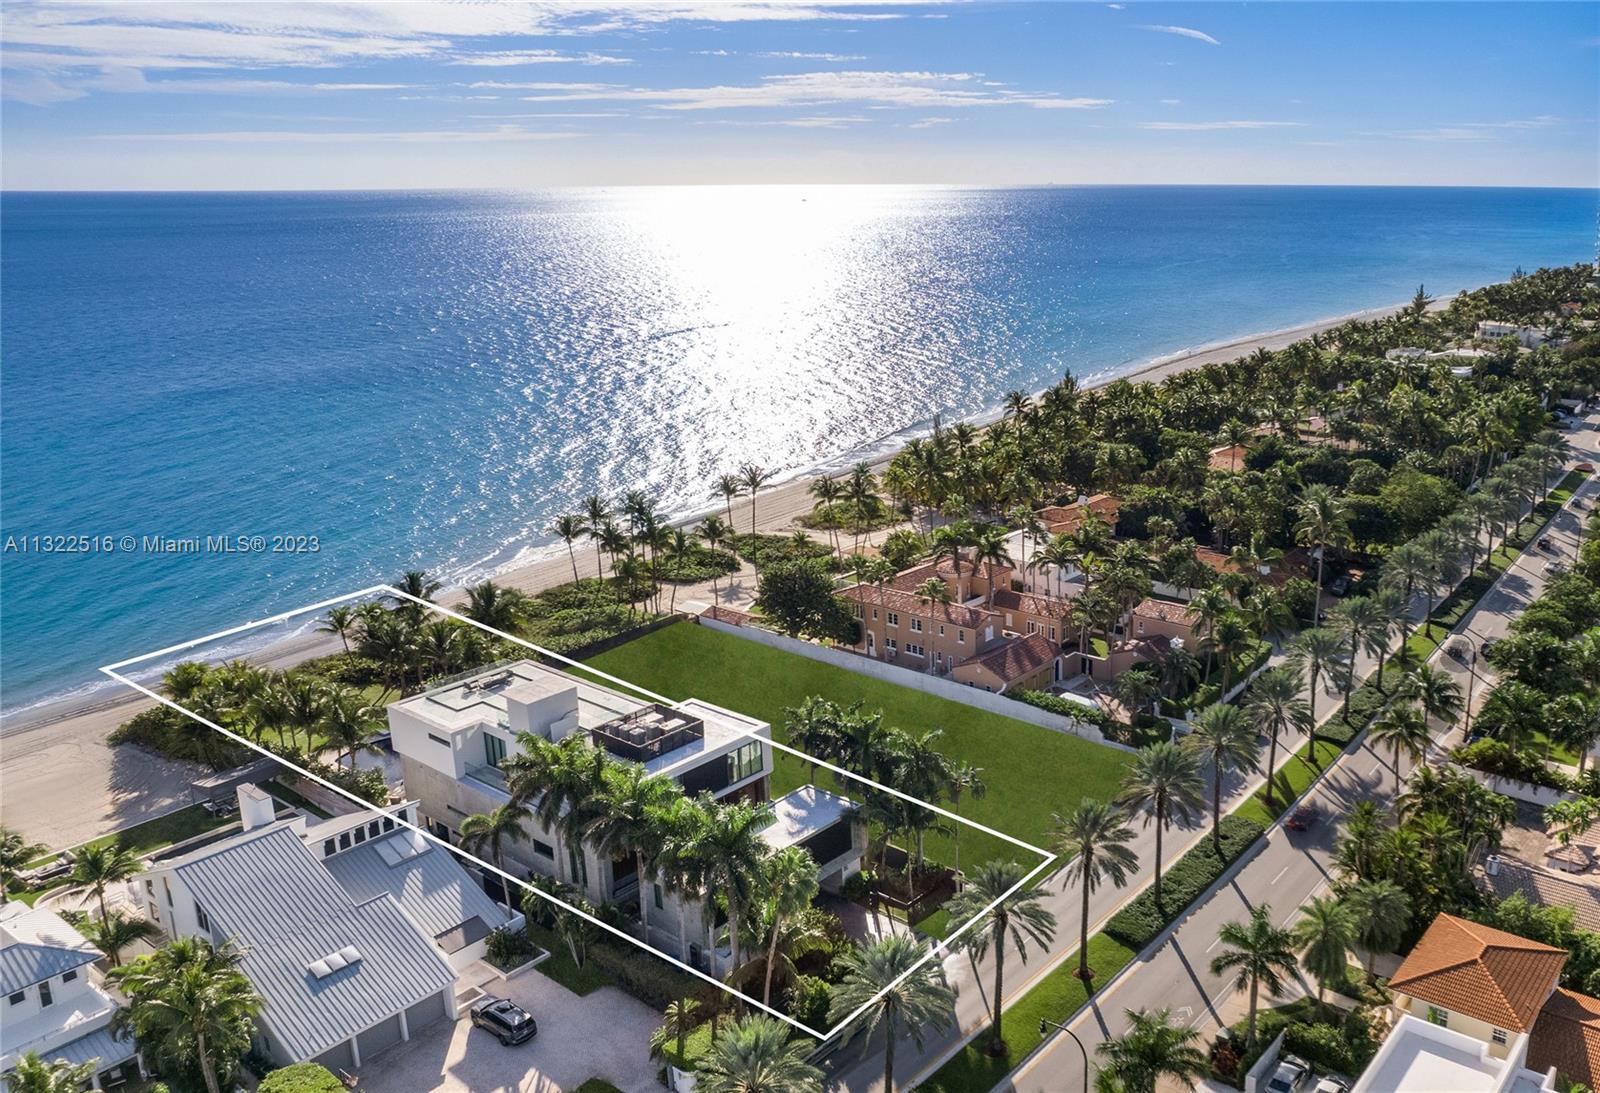 Imagine yourself living in this spectacular, 3-story beachfront mansion located in the exclusive town of Golden Beach where the Atlantic Ocean is your backyard! A rare find as this is the only newly built, single-family home on the sand/beach in Miami-Dade! Sprawled on 20,925-SF of land with 75-FT of direct beachfront, this luxe mansion has a rooftop on the 4th level, 6 bedrooms - including a lavish master suite with hers/his baths on the 3rd level, living areas with a wet bar, kitchen, family room, and elegant dining room on the 2nd level, and a full floor of recreation area, movie theater, and staff on the ground level. Enjoy ocean views from everywhere while indulging on luxe amenities including an elevator, 2 summer kitchens, pool, spa, cabana, detached guest suite, 2-car garage!